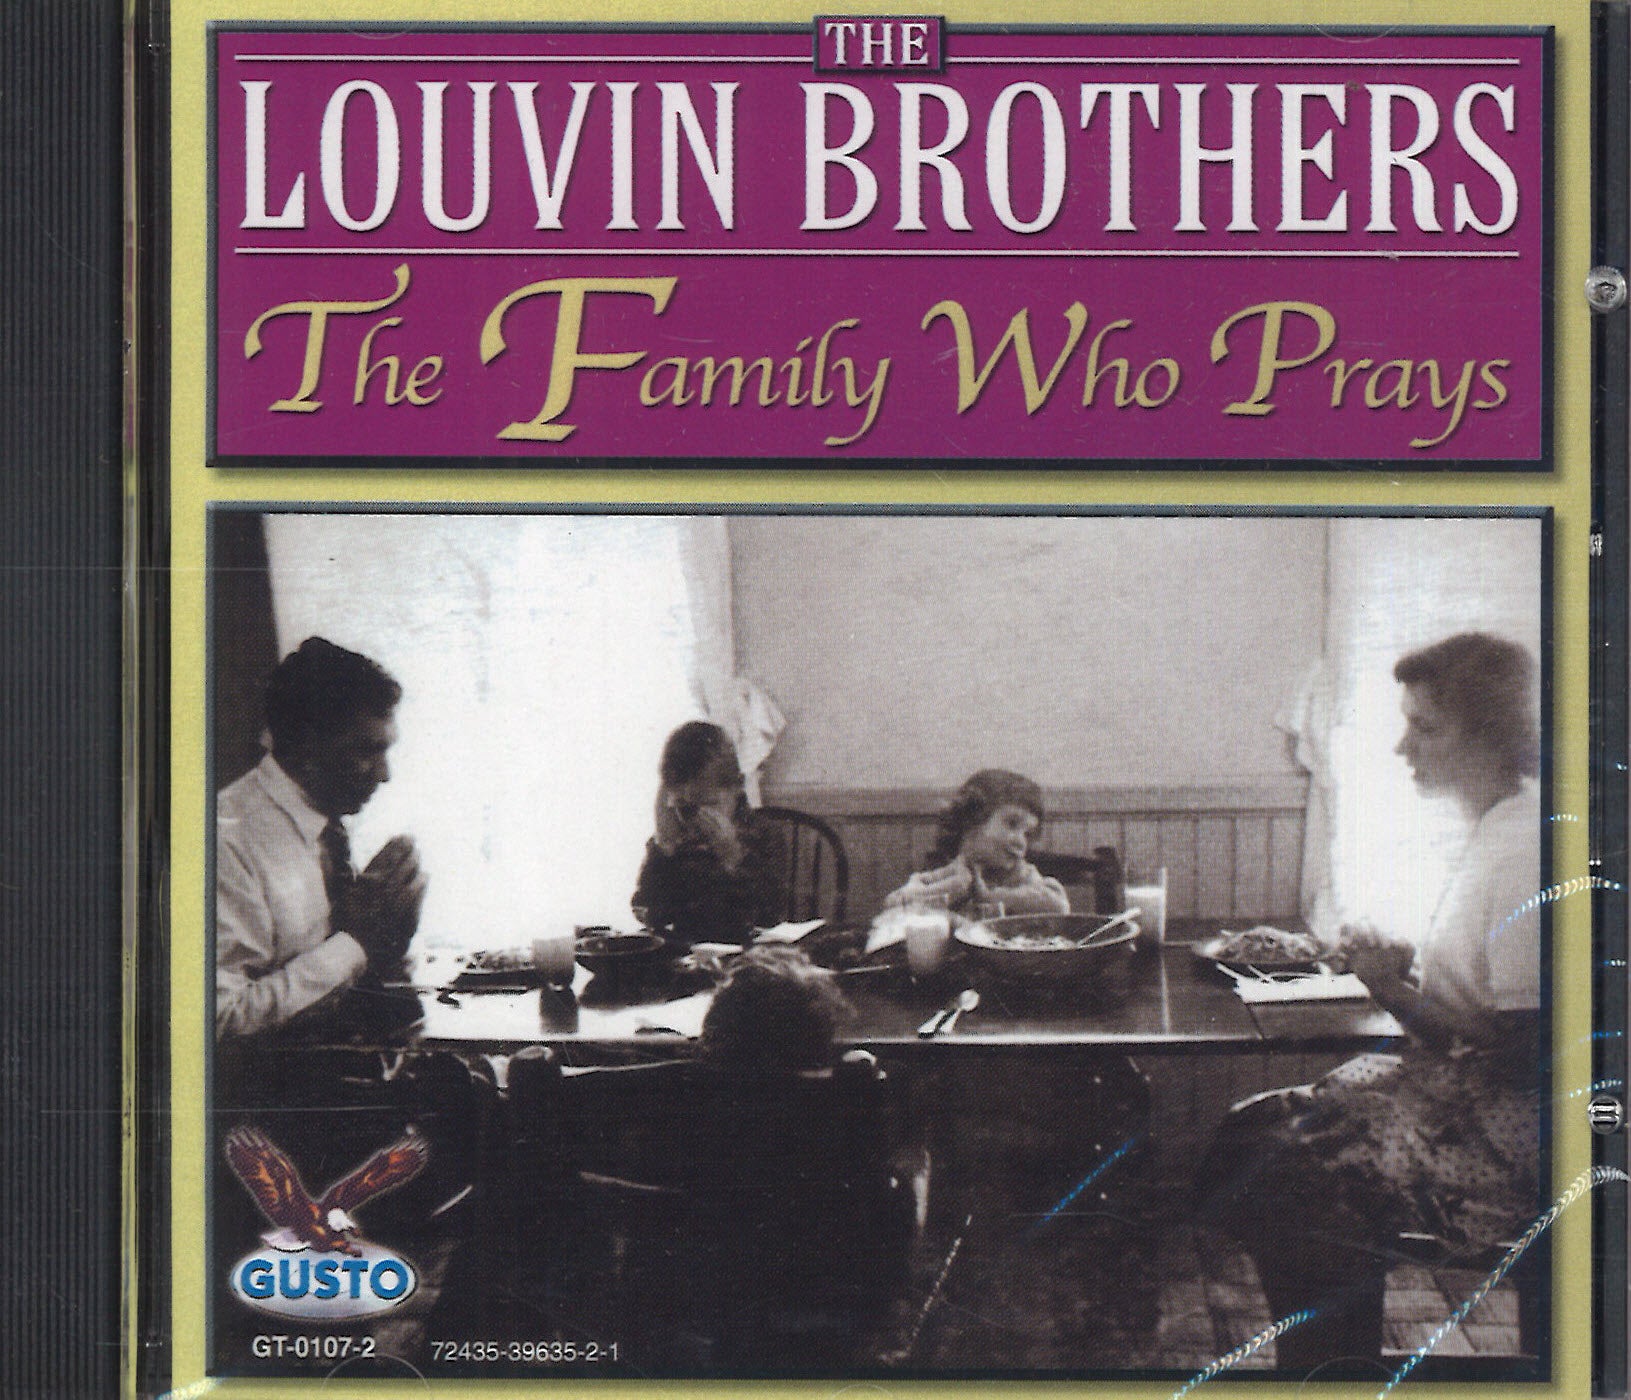 The Louvin Brothers The Family Who Prays